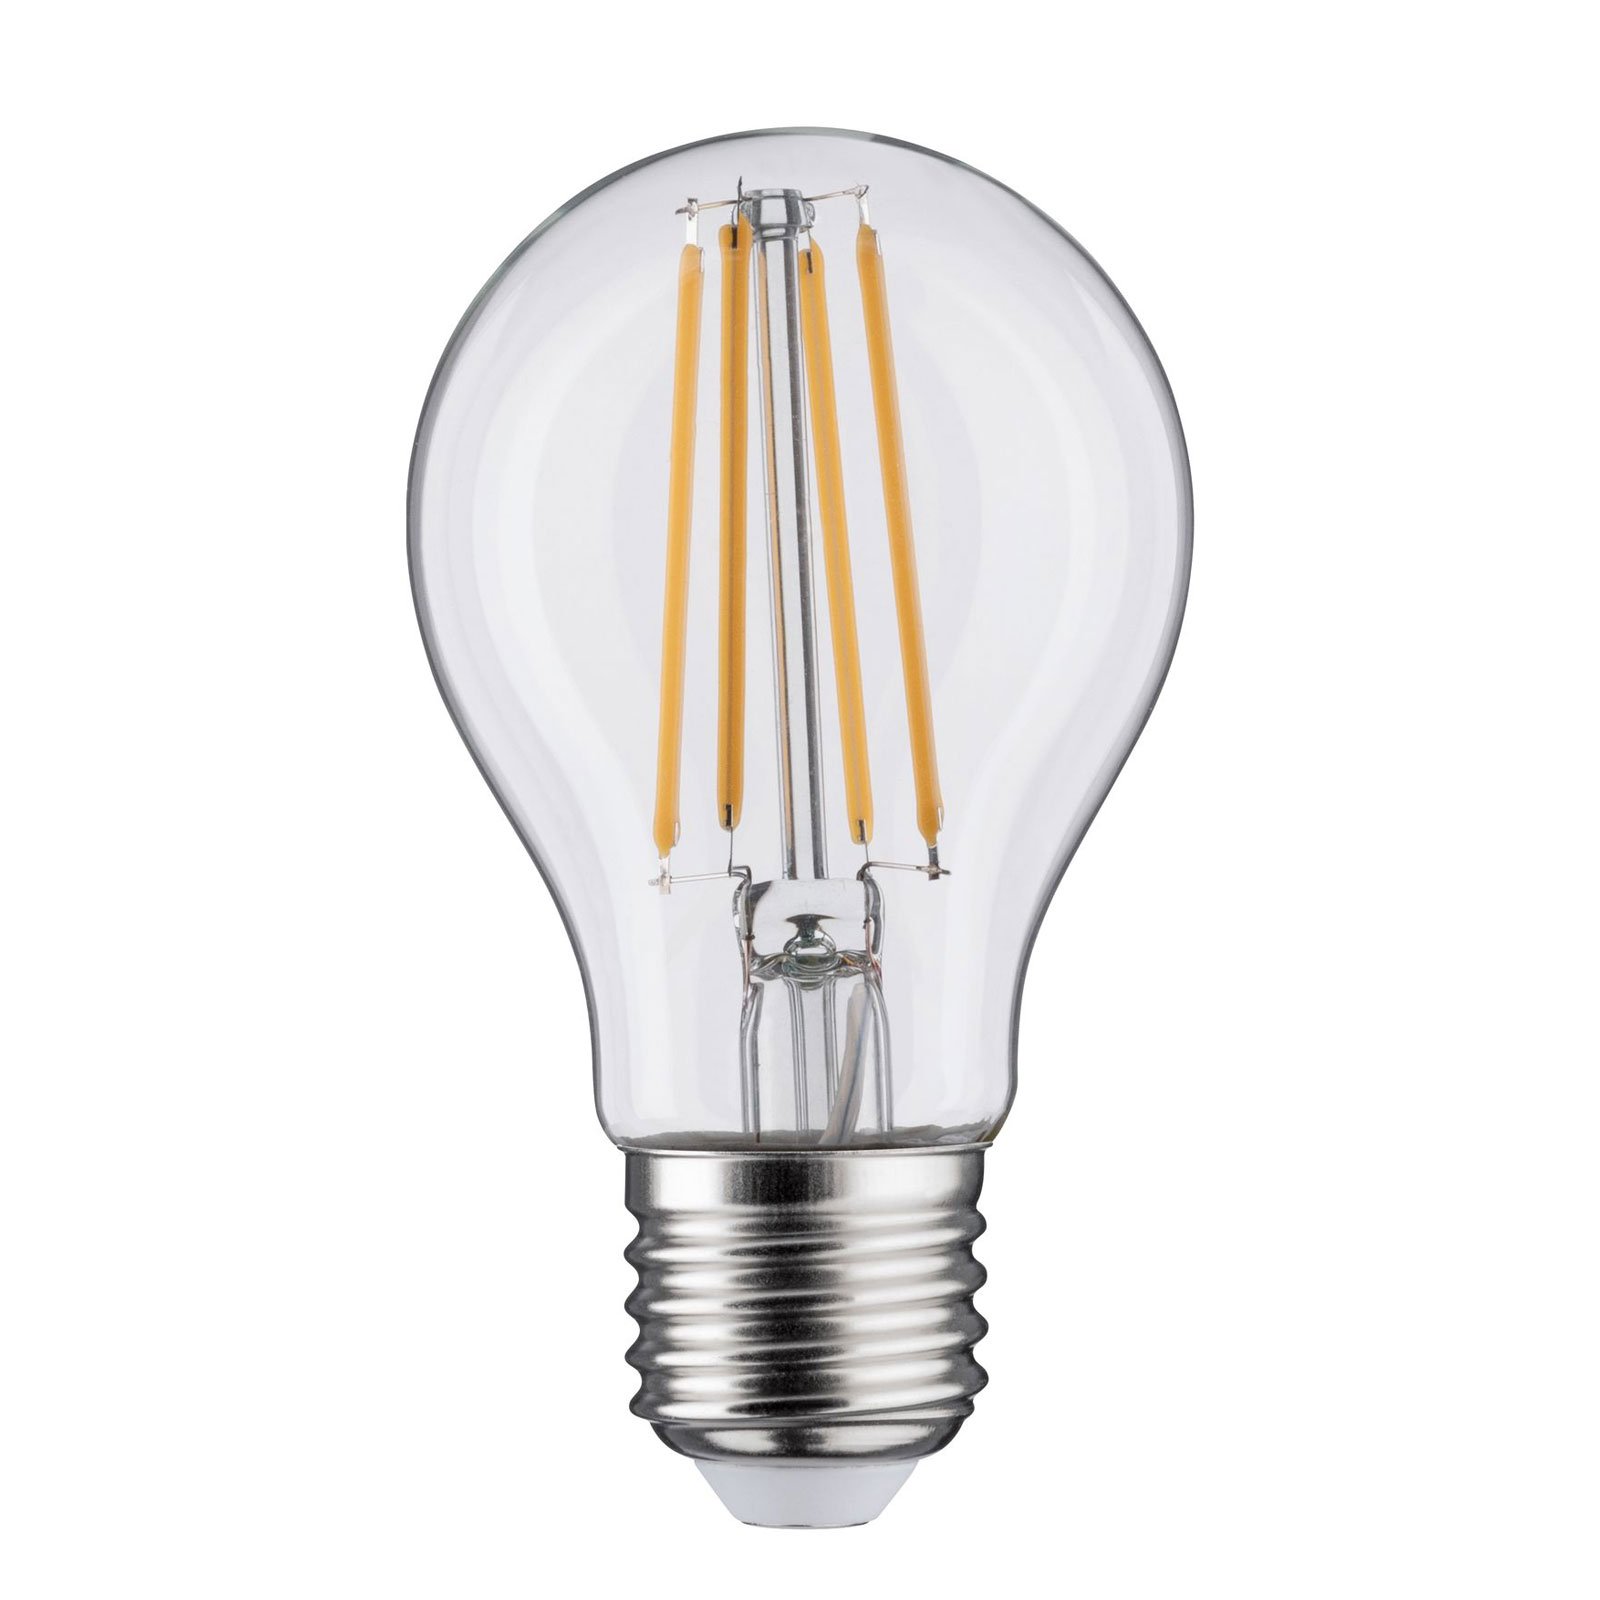 E27 LED bulb 9W filament 2,700K clear dimmable